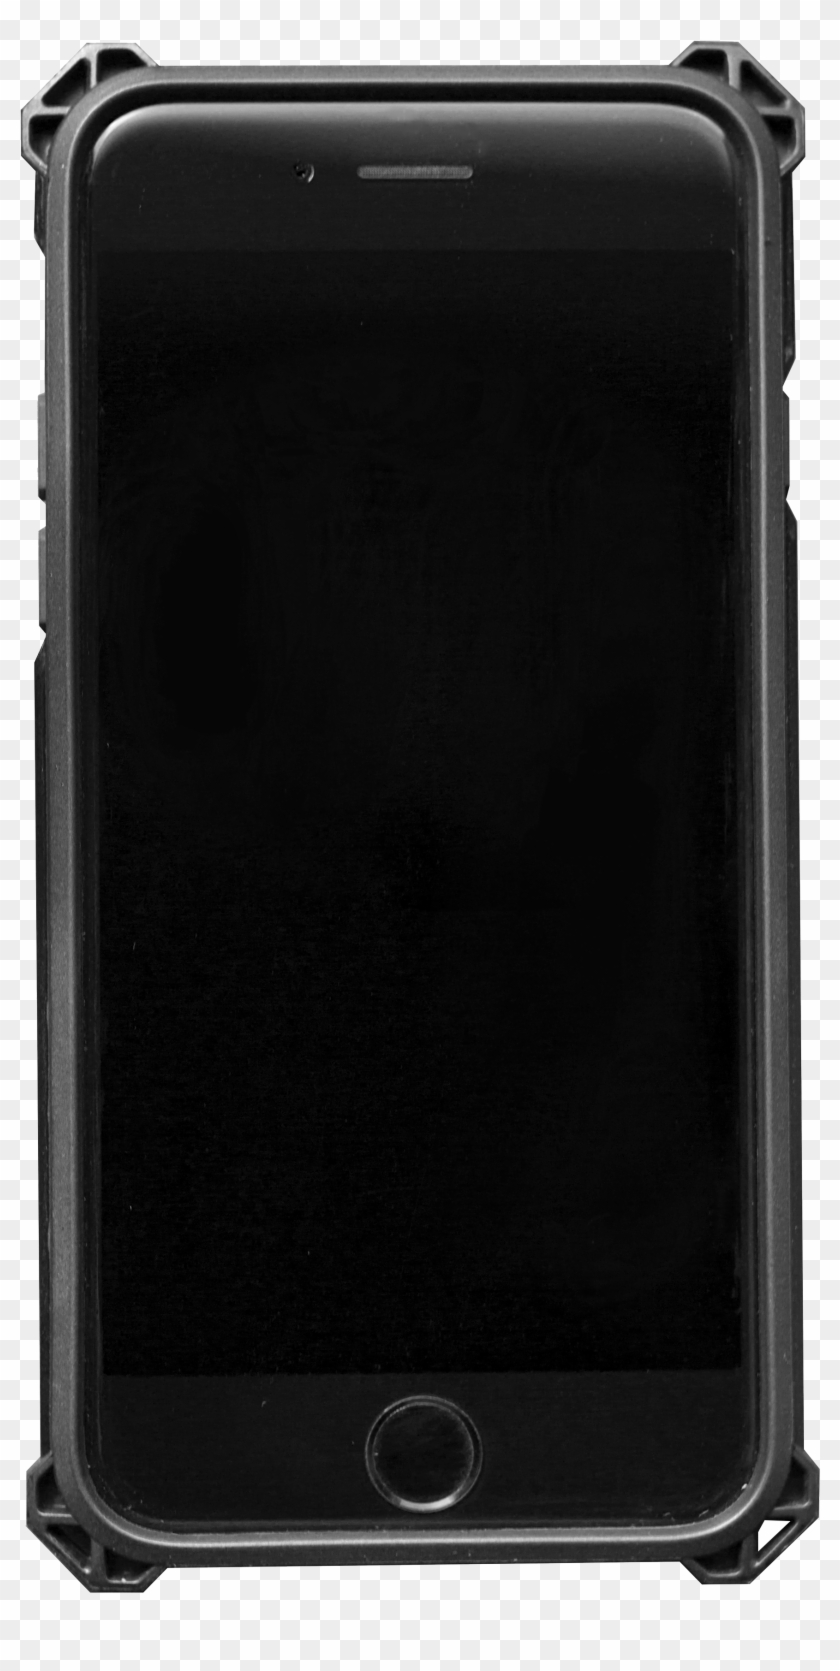 Utility™ - Cat Phones Active Utility Case For Iphone 6 - Black #1331707